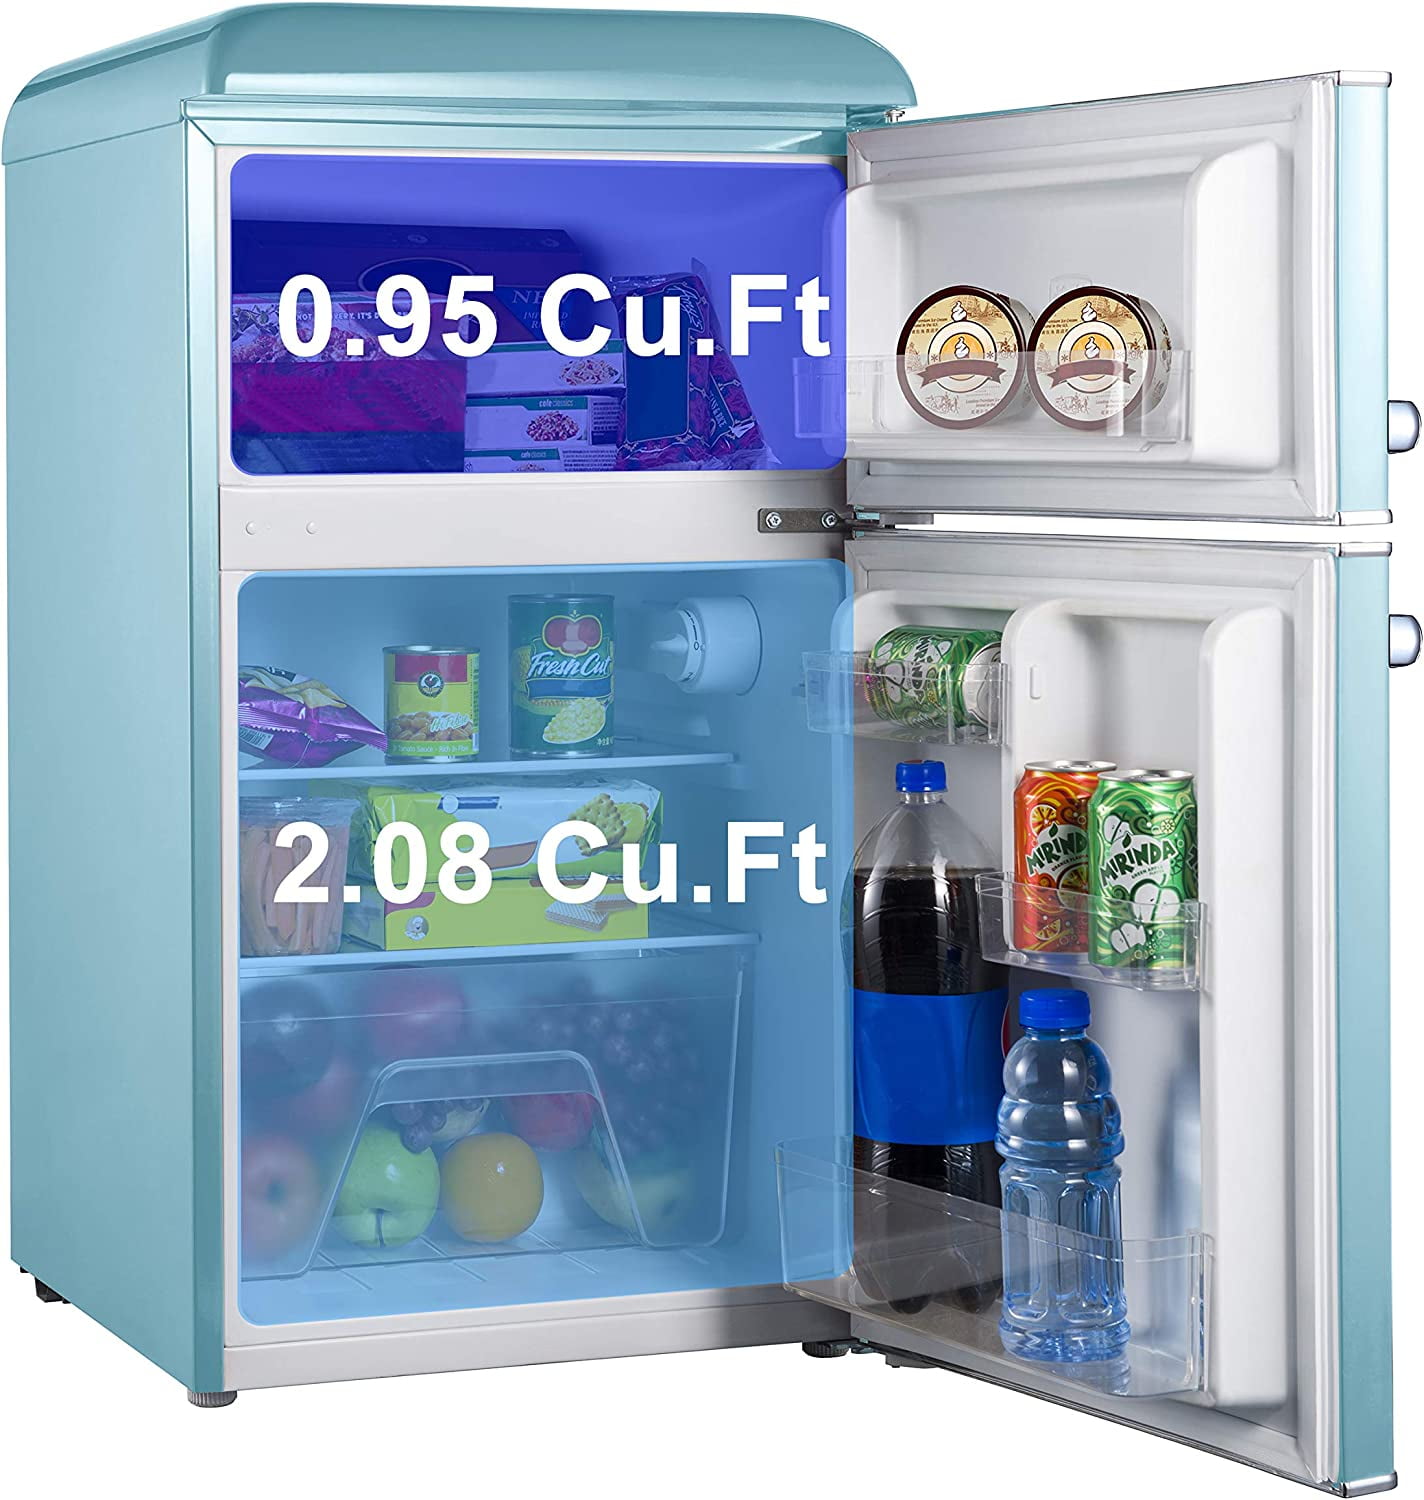  Galanz GLR33MBER10 Retro Compact Refrigerator, Single Door  Fridge, Adjustable Mechanical Thermostat with Chiller, Blue, 3.3 Cu Ft :  Home & Kitchen